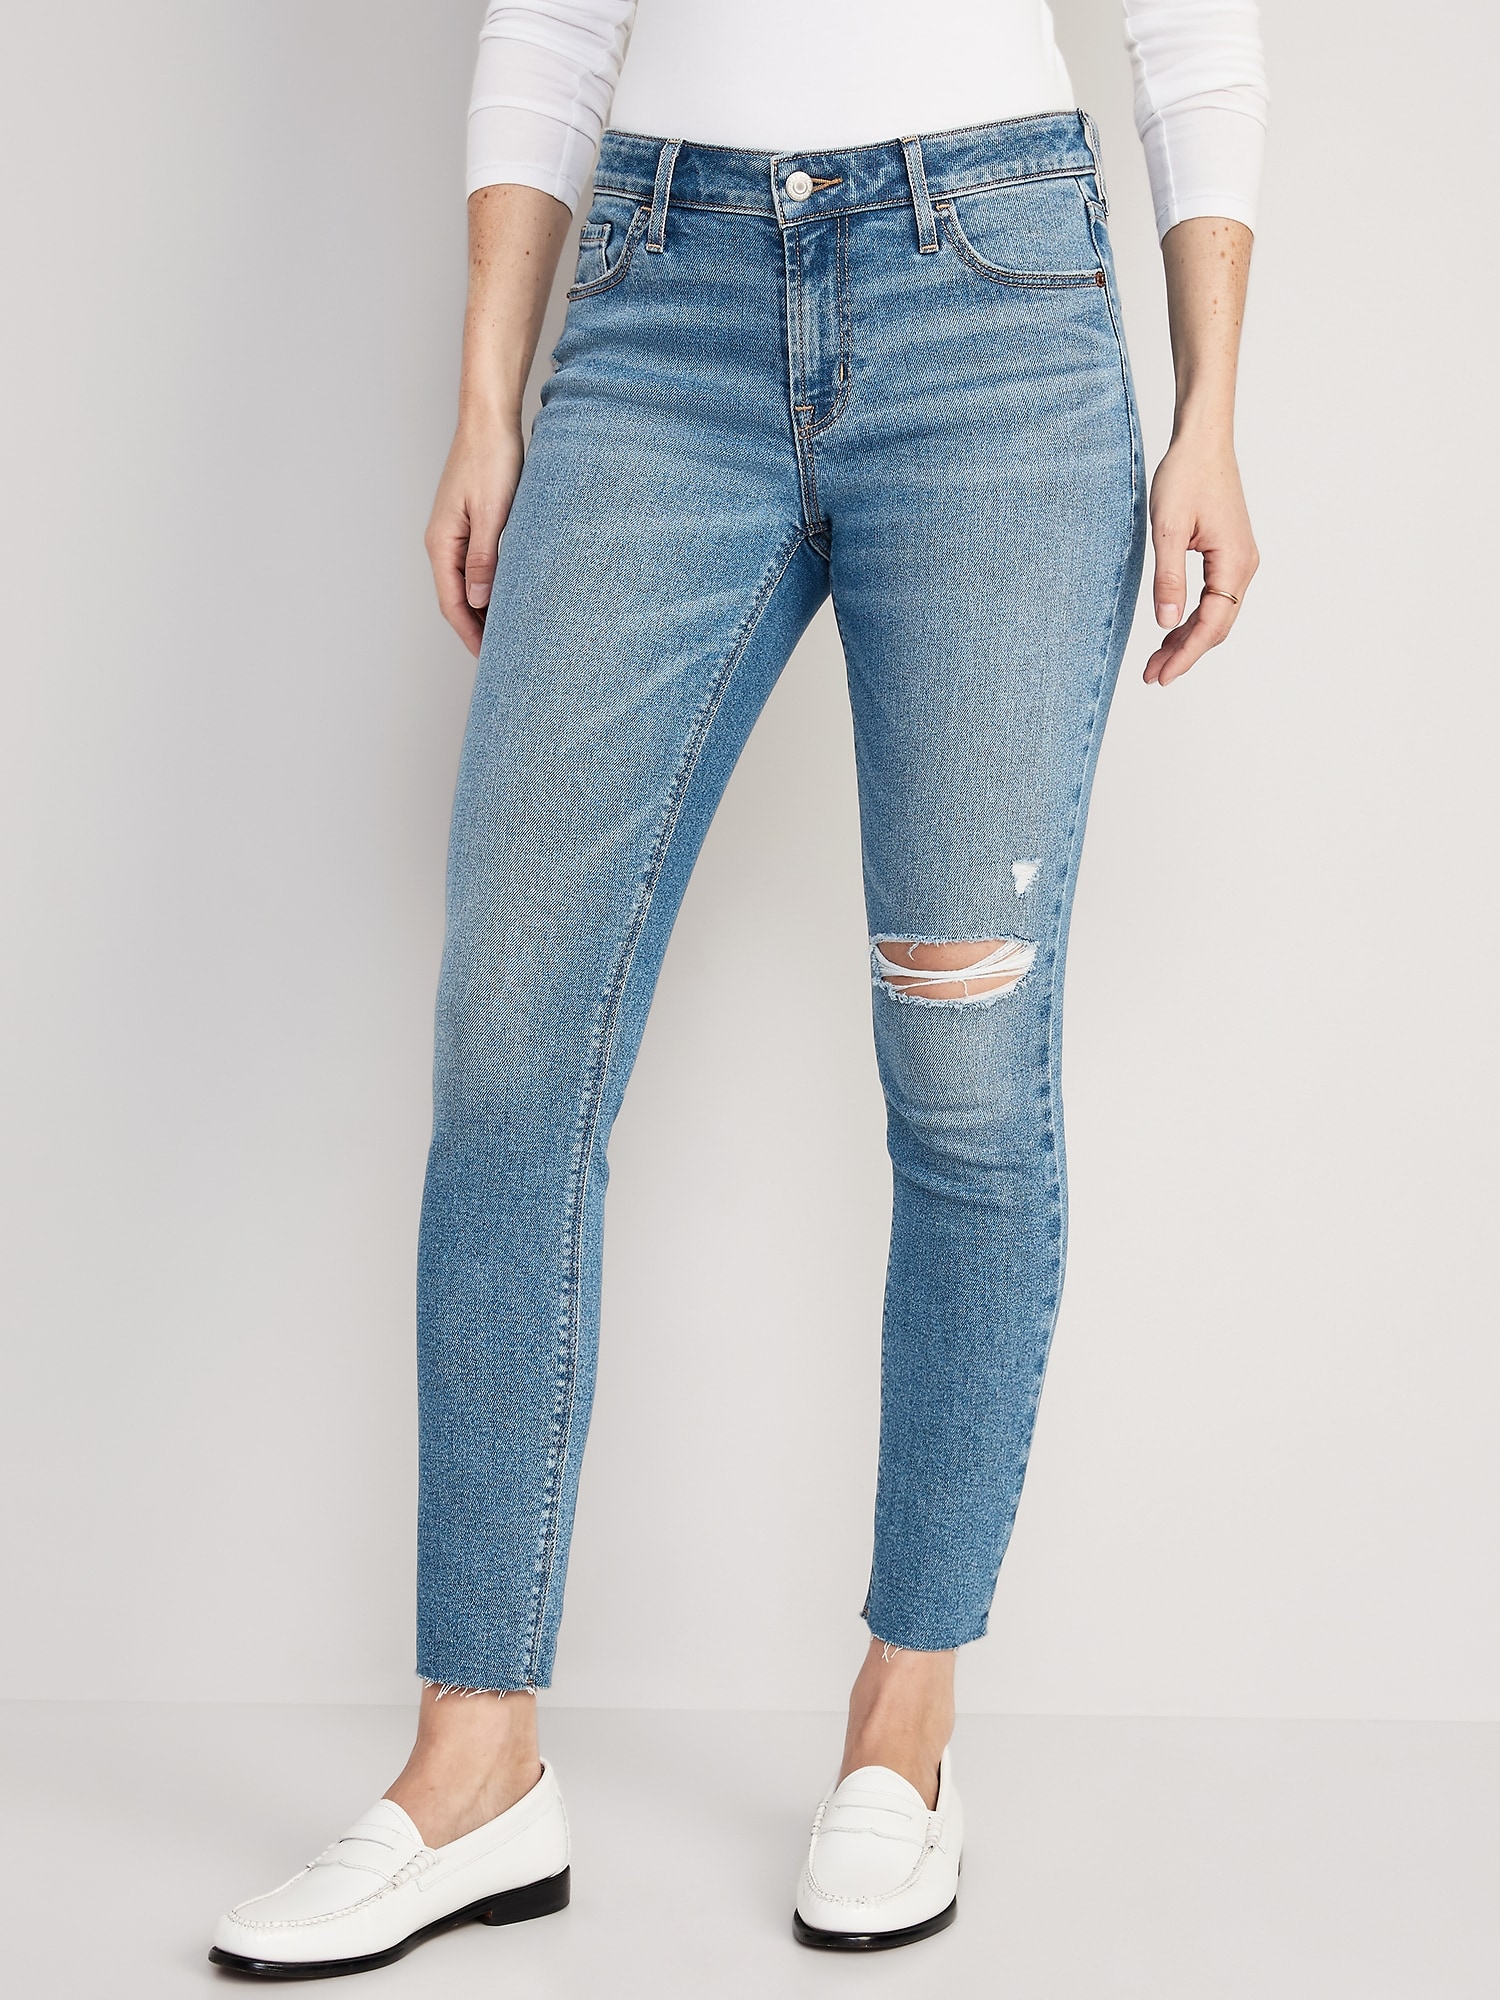 Old Women\'s Navy Jeans | Chic